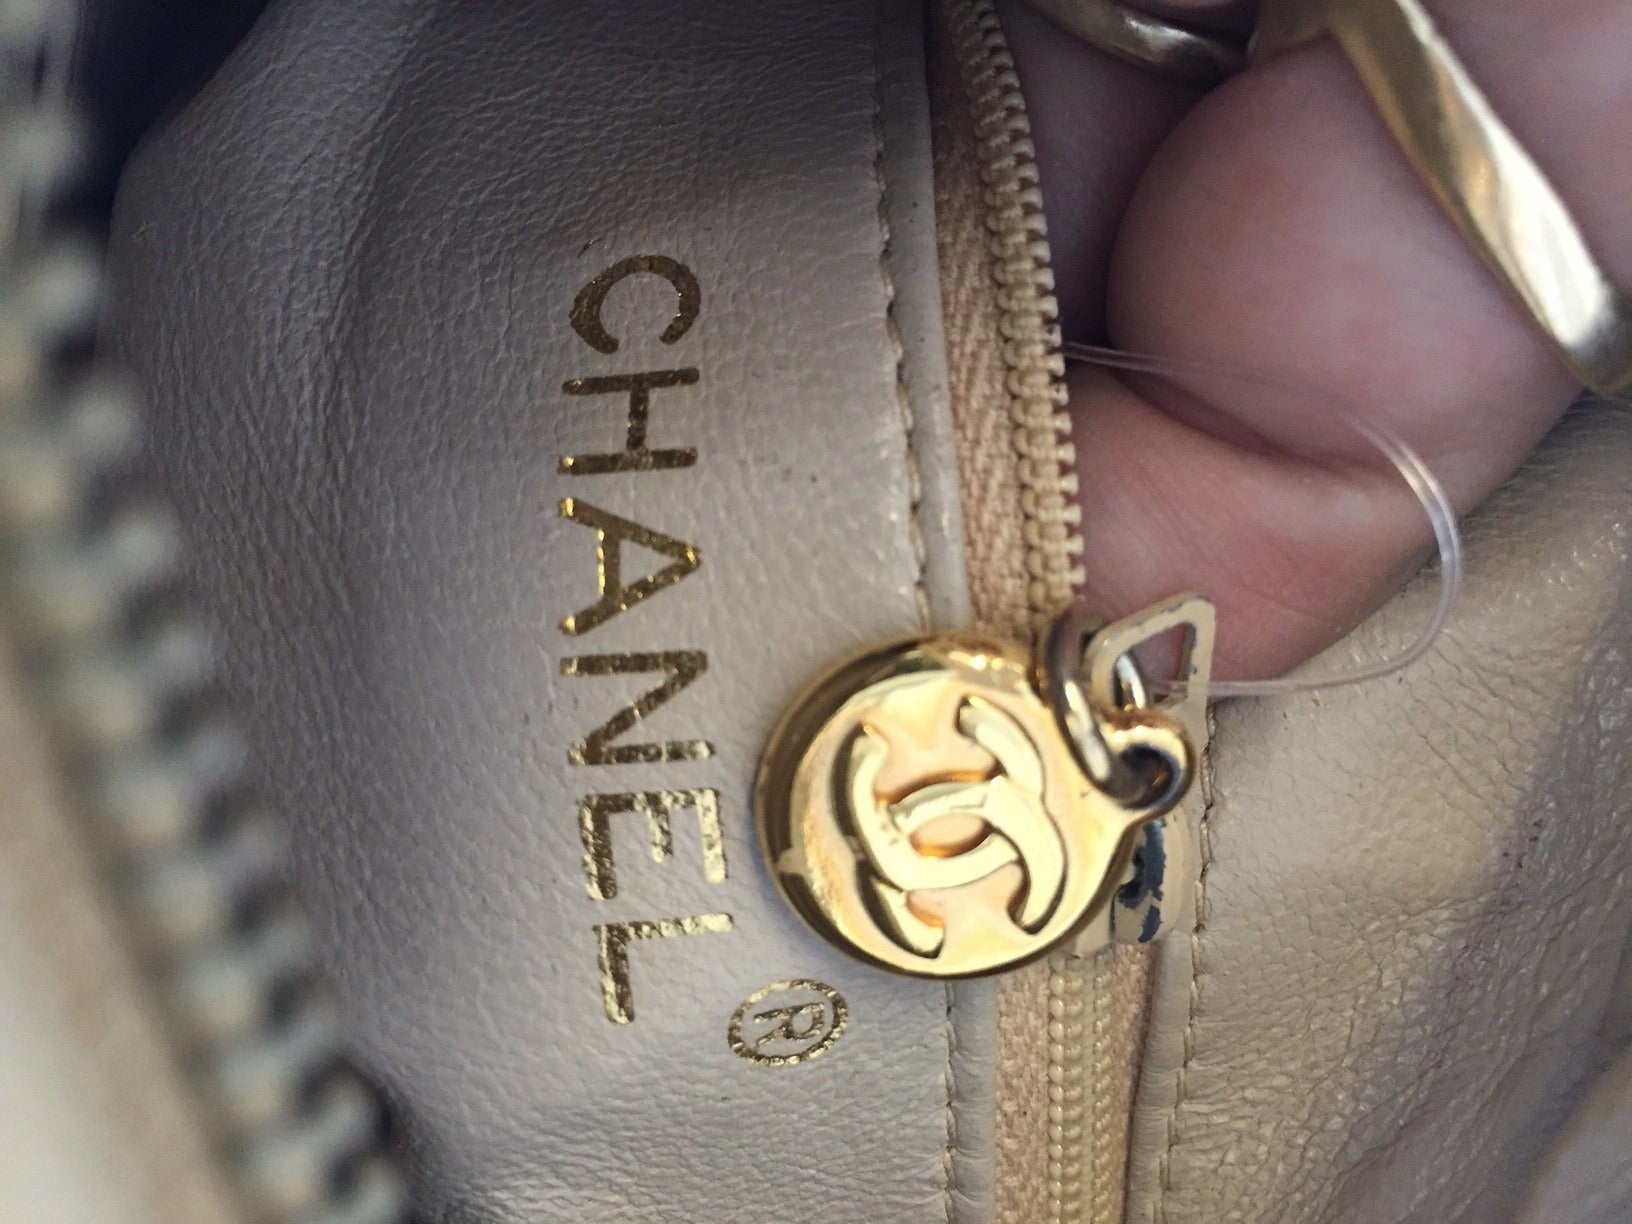 Chanel Vintage Camera Knot Bag in Beige In Excellent Condition For Sale In Westmount, Quebec